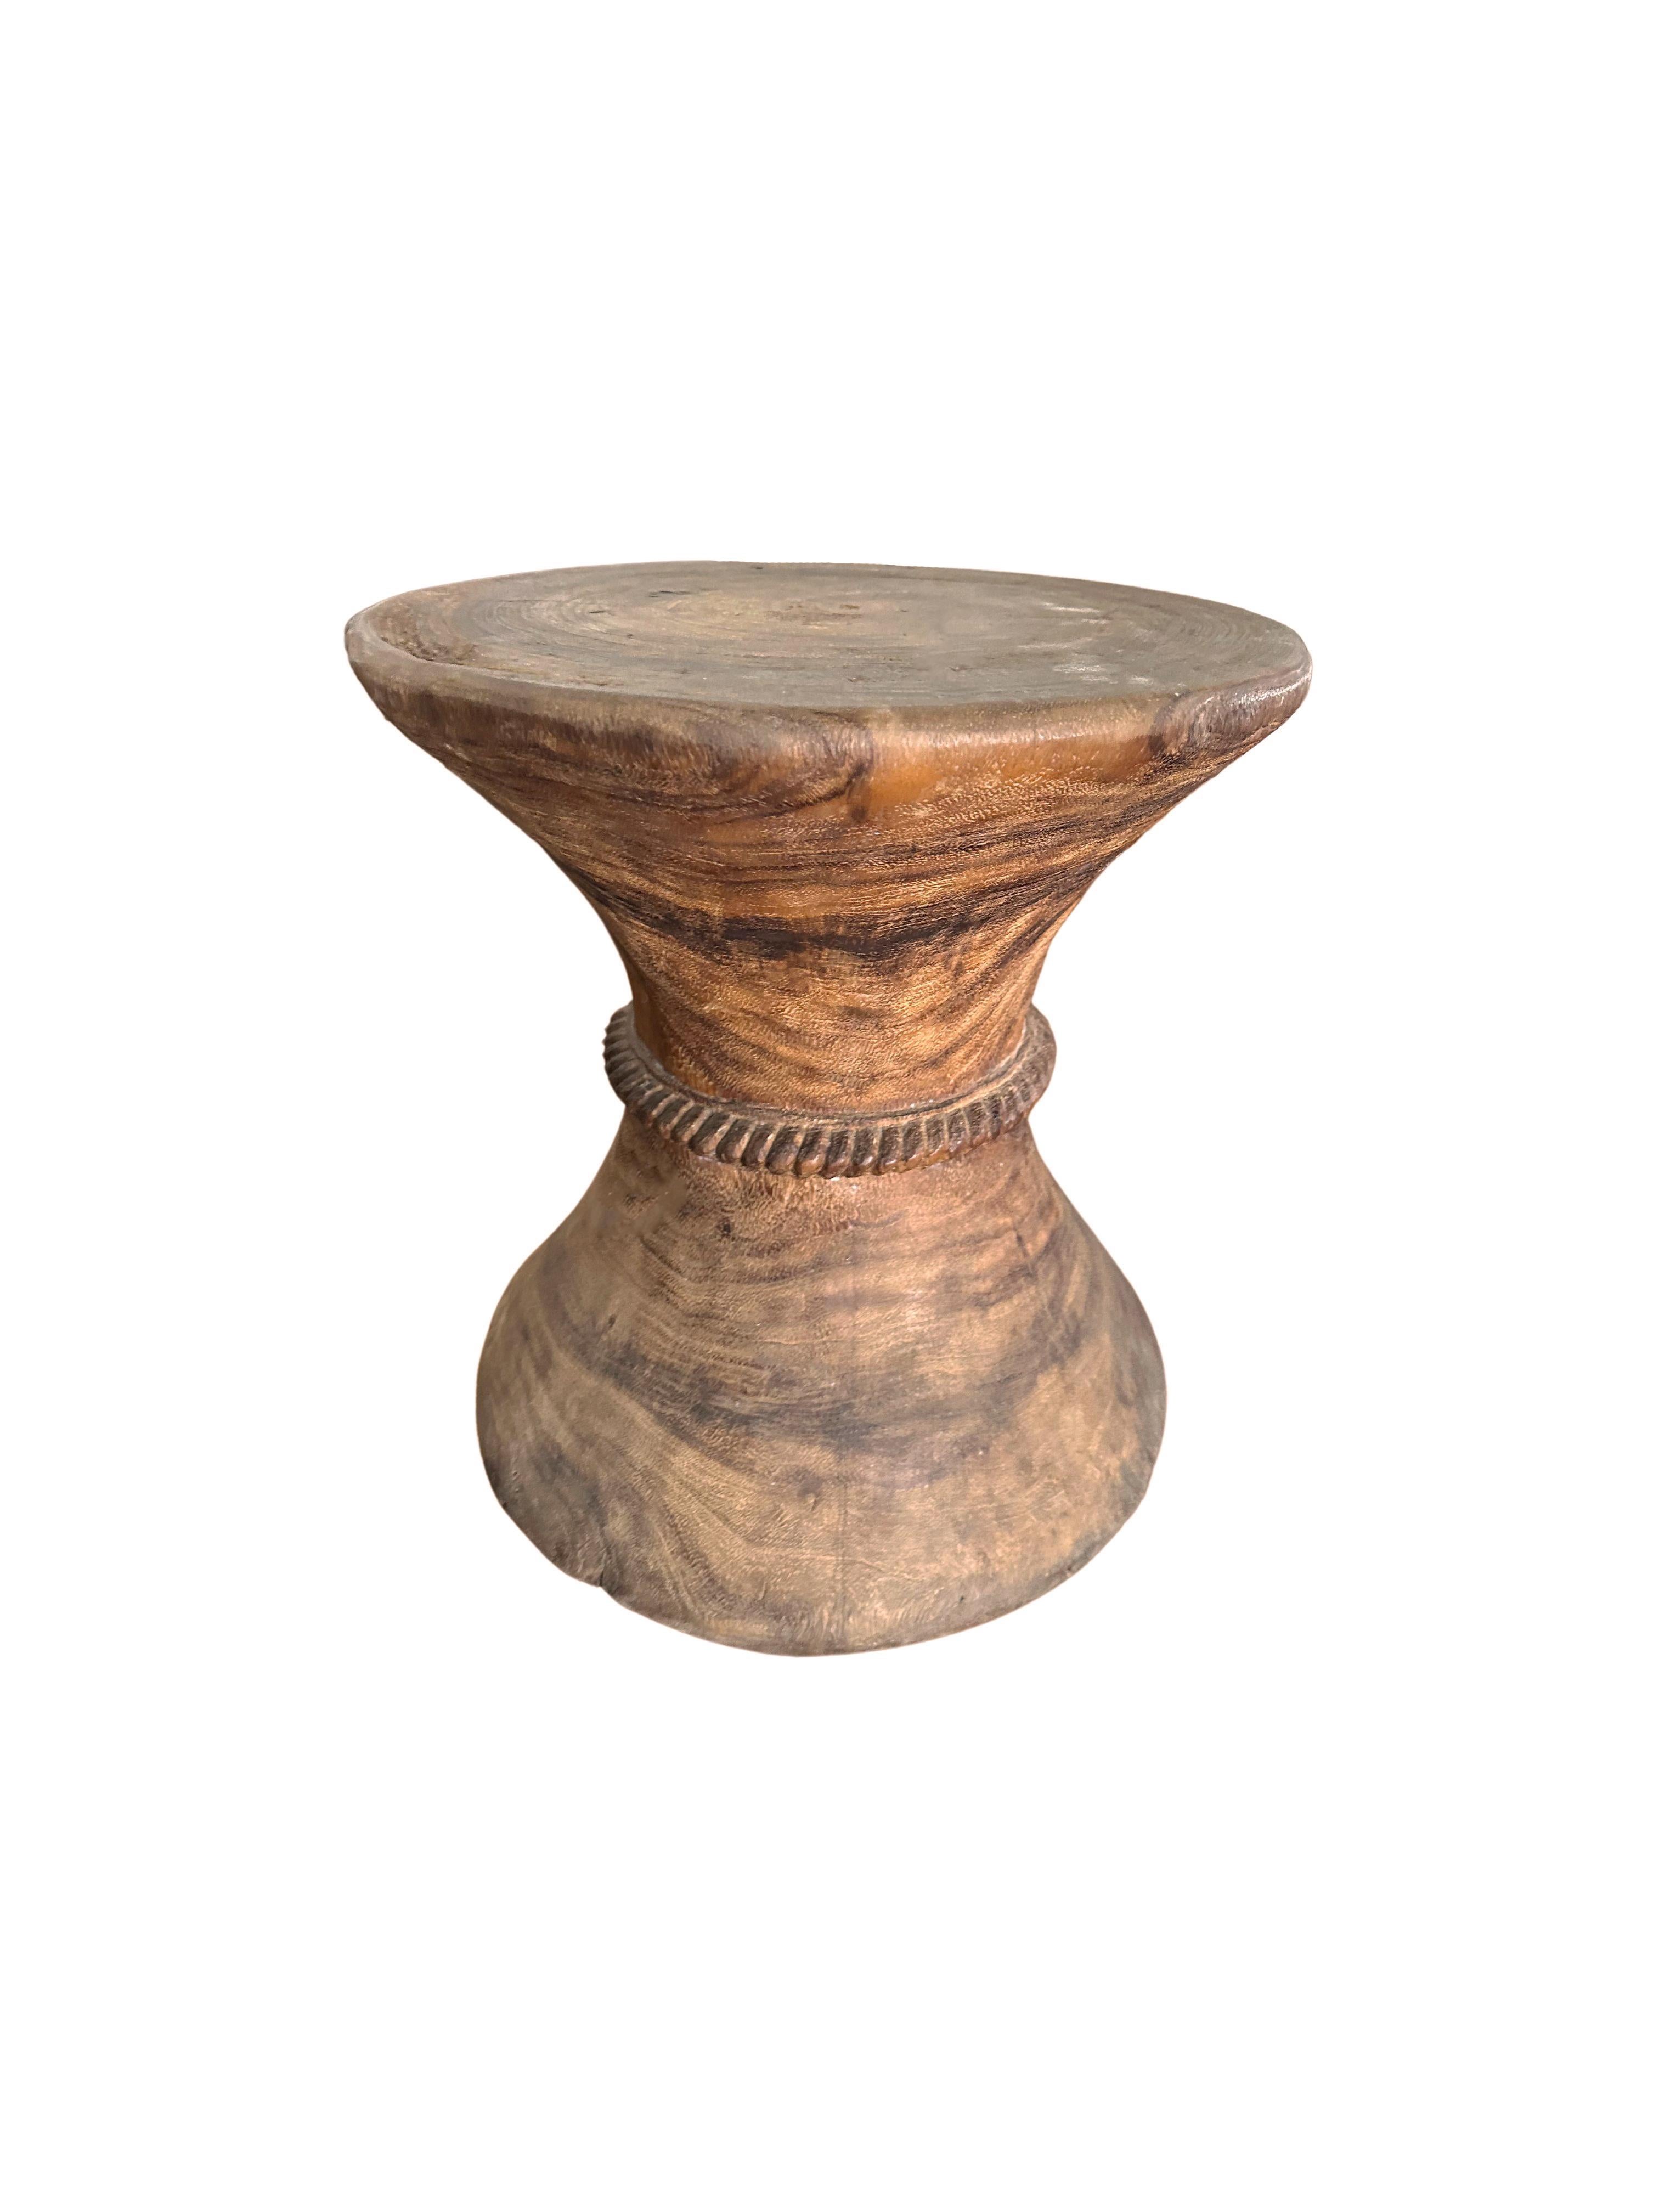 A wonderfully sculptural solid teak side table with carved detailing at its center. The mix of wood textures and shades add to its charm. 